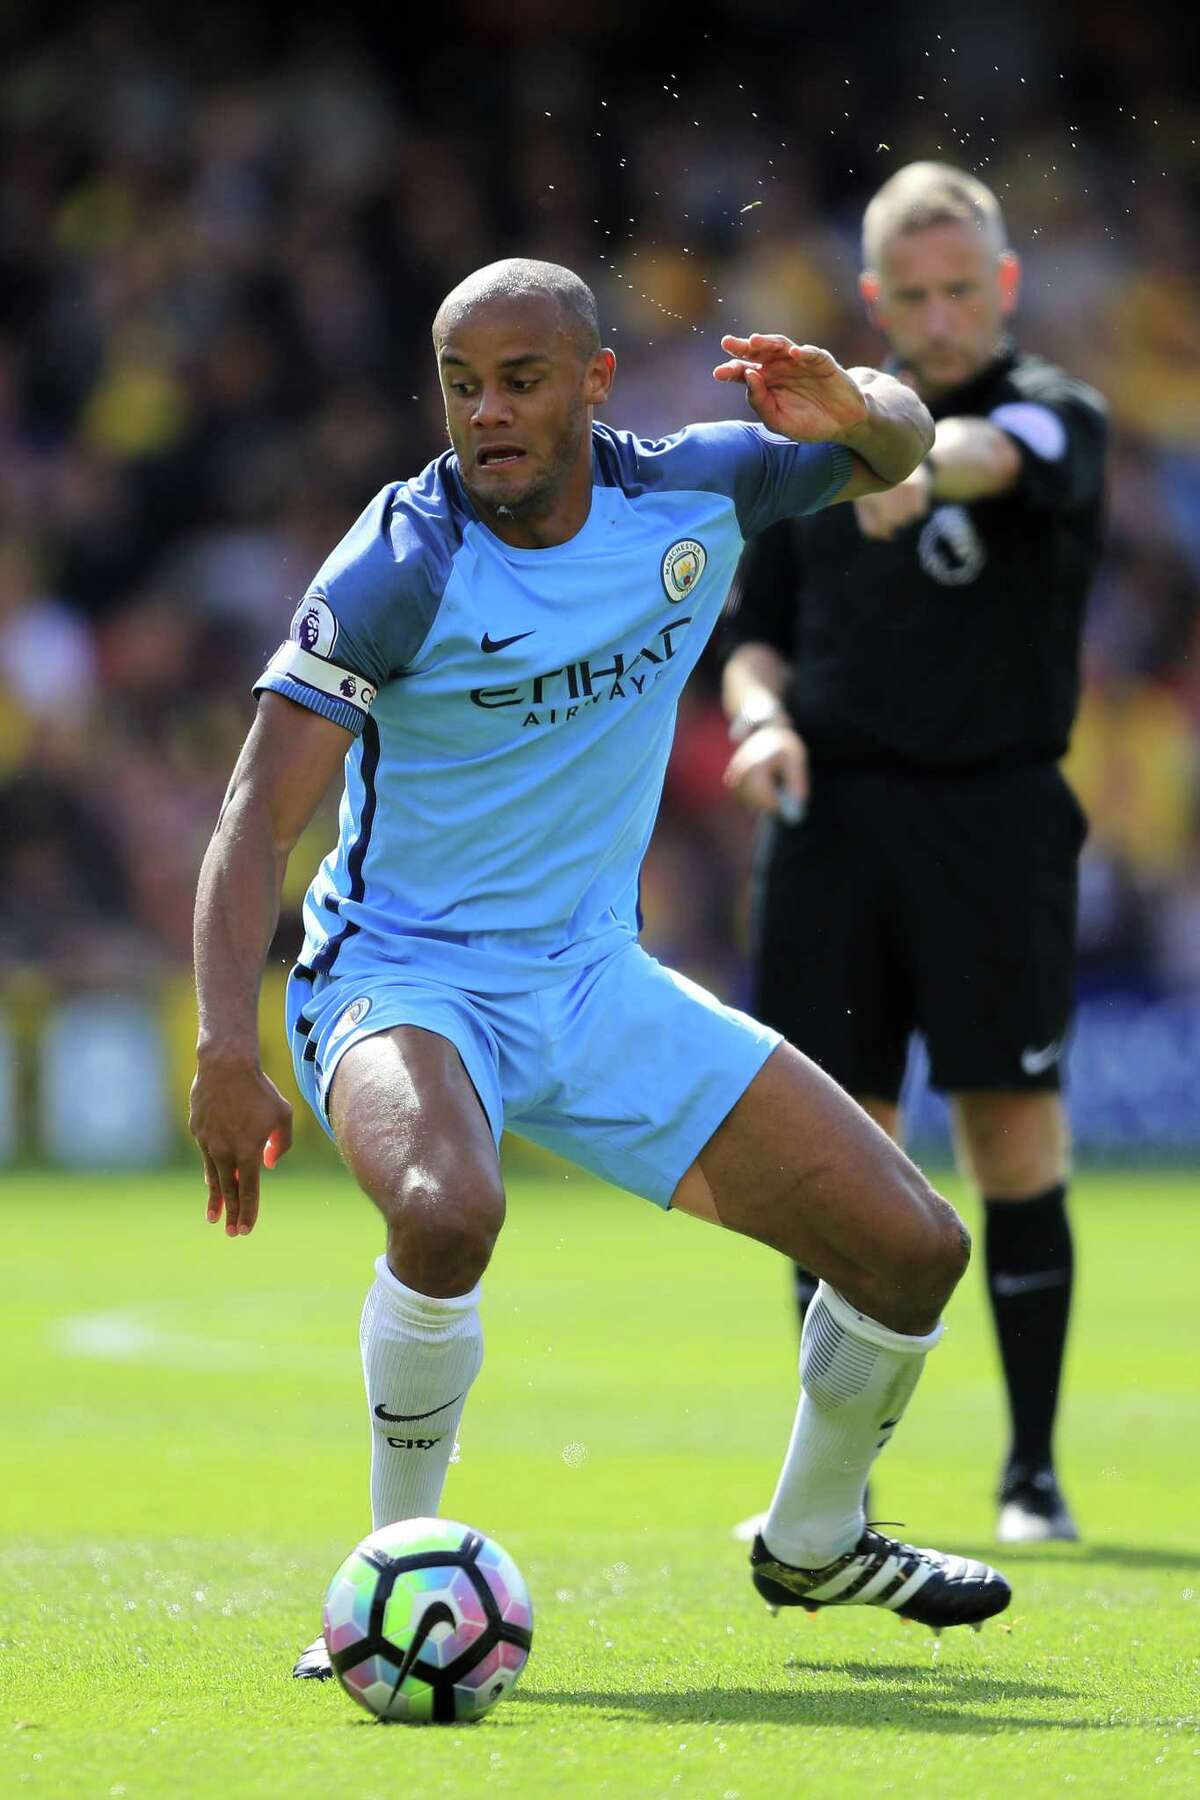 Vincent Kompany of Manchester City says fans are right to anticipate this game.